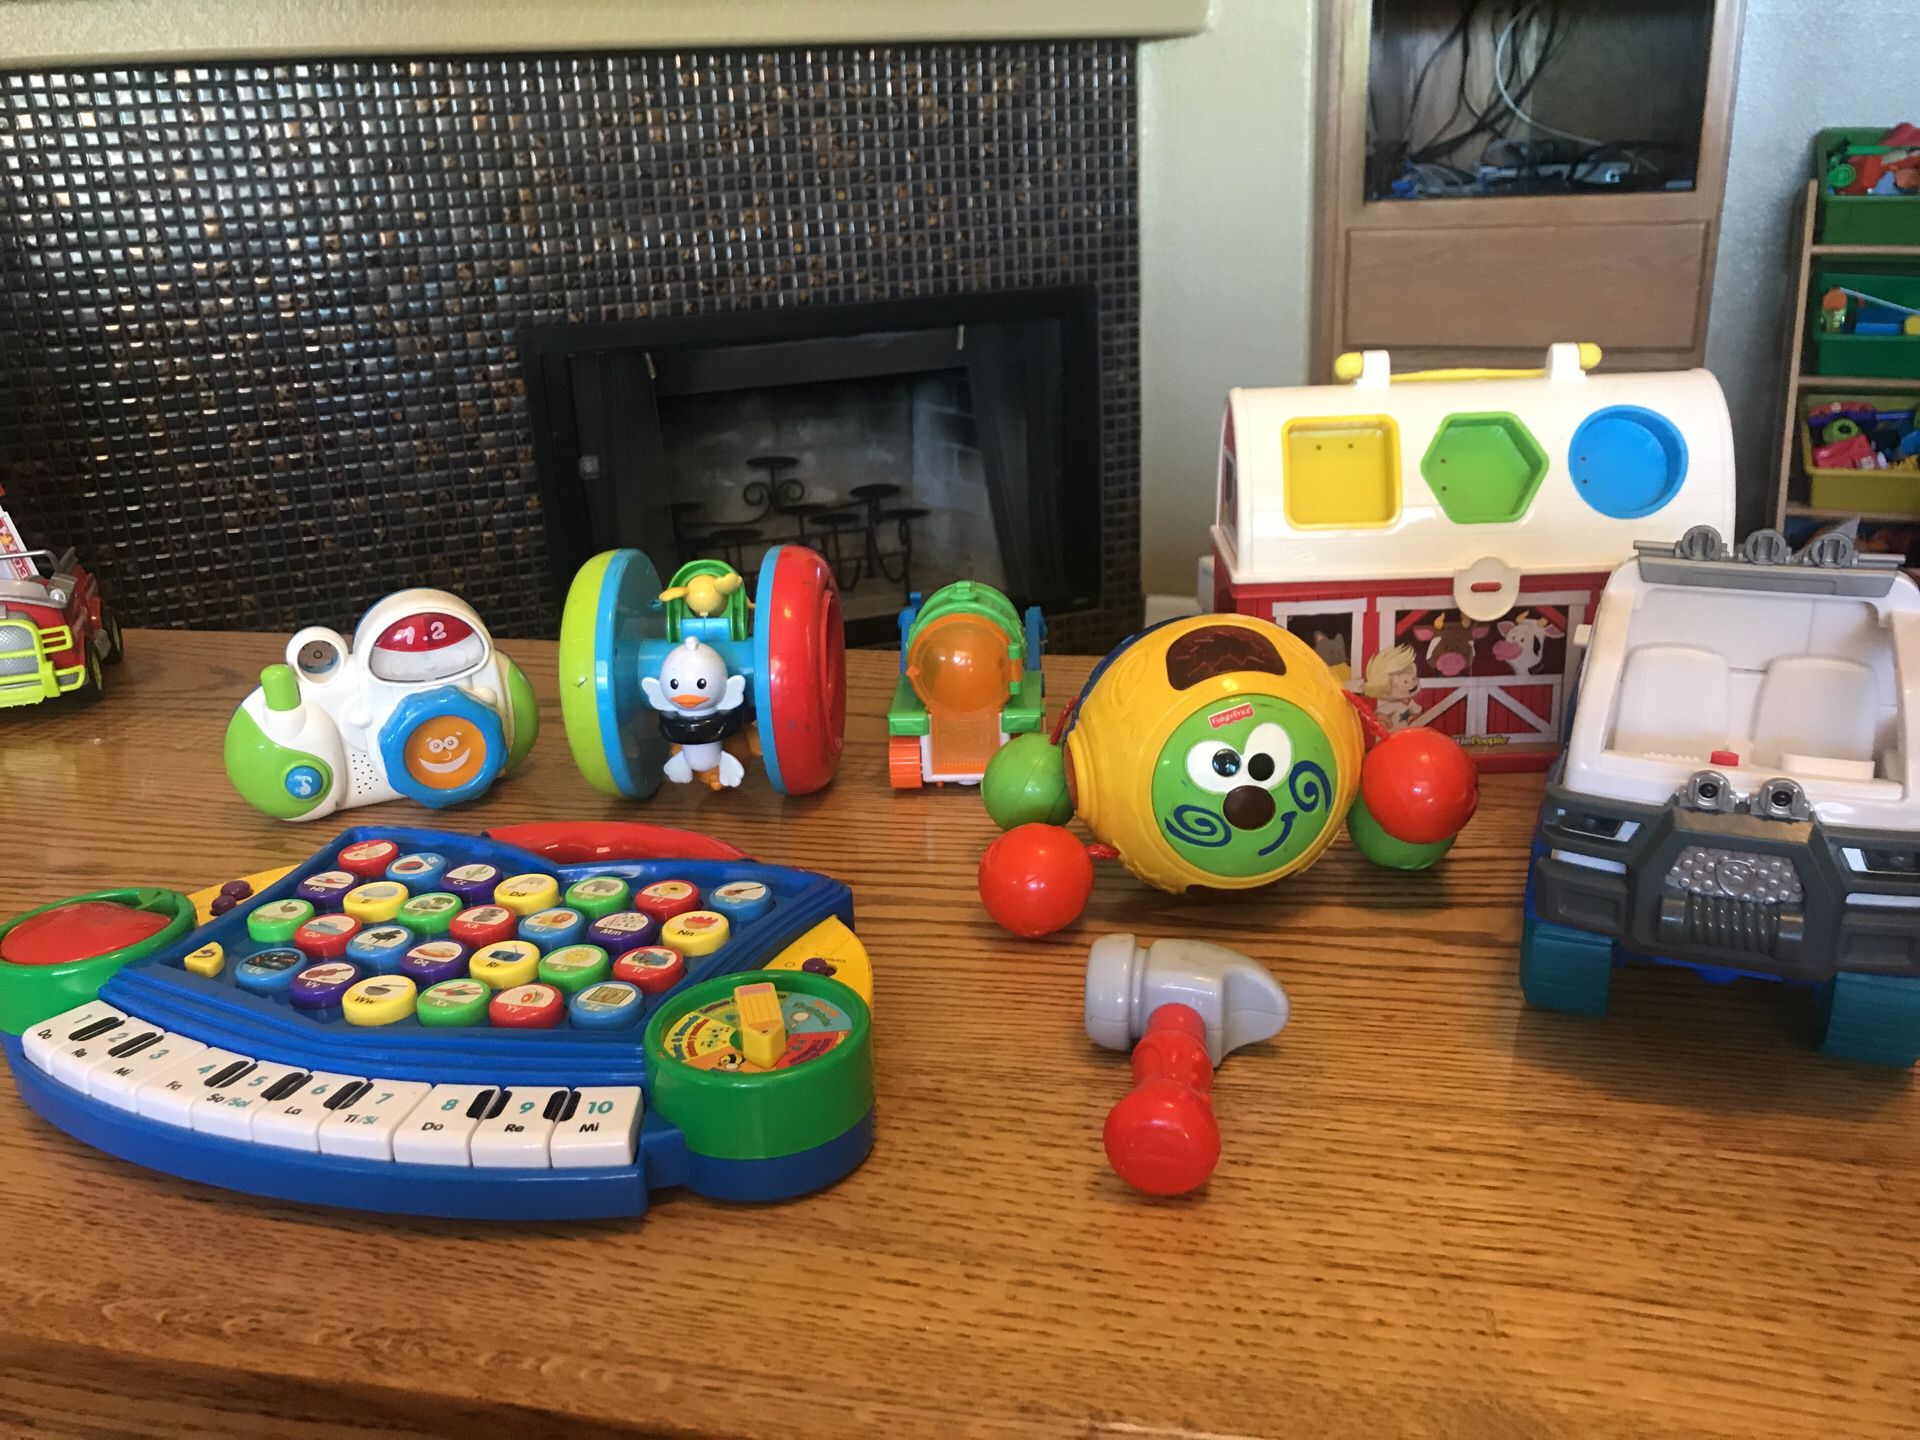 Toys for babies/Toddlers